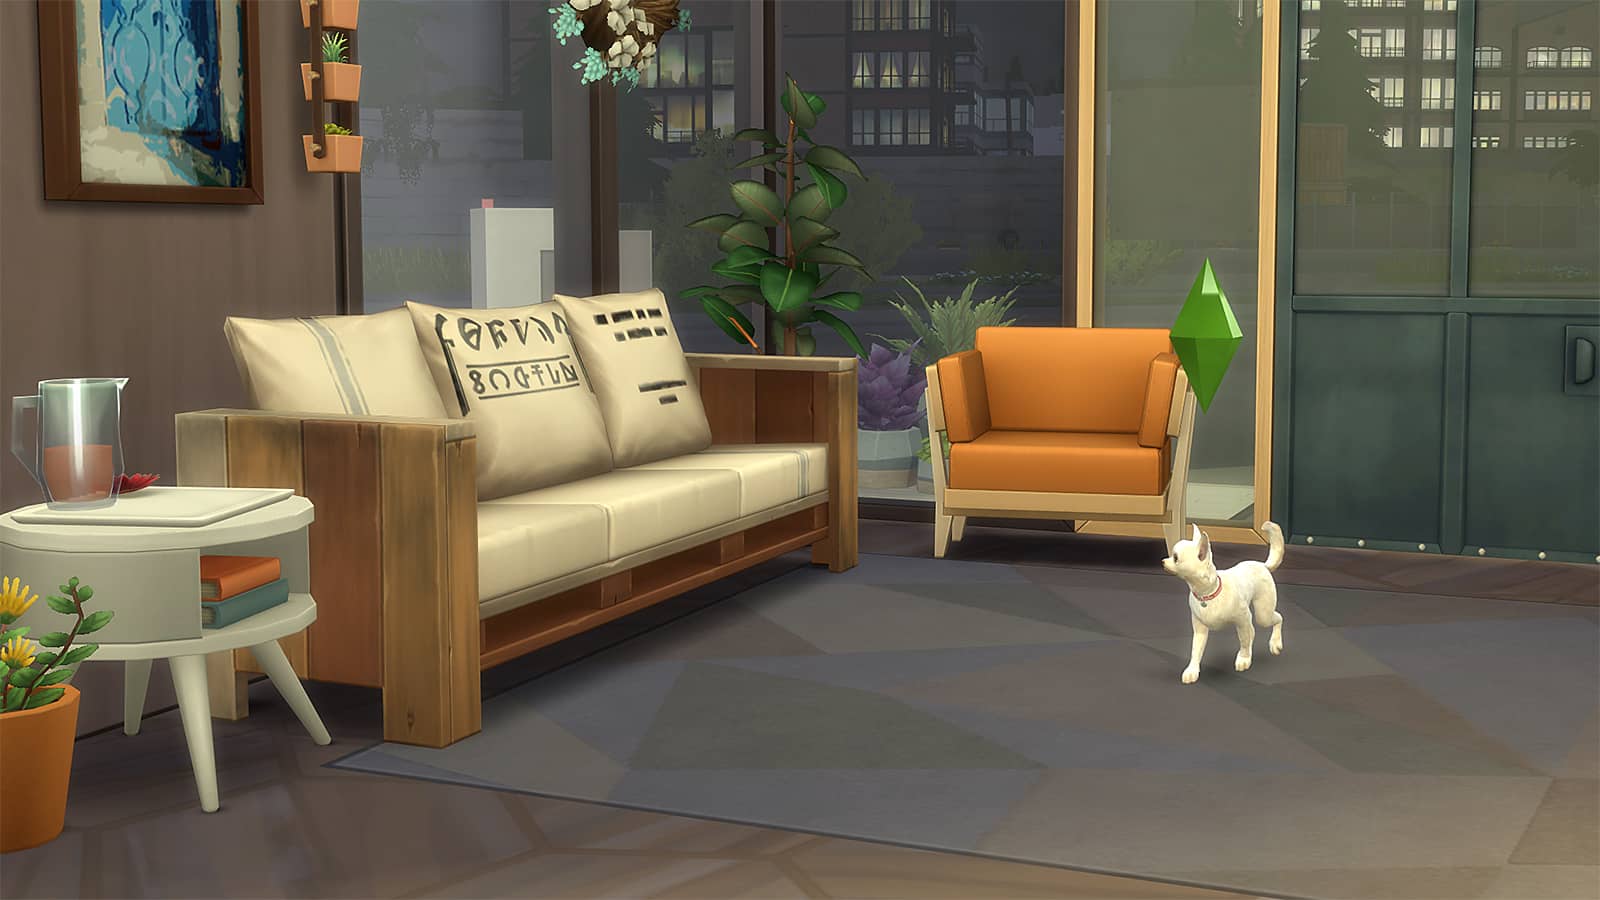 A screenshot of Playable Pets gameplay in Sims 4